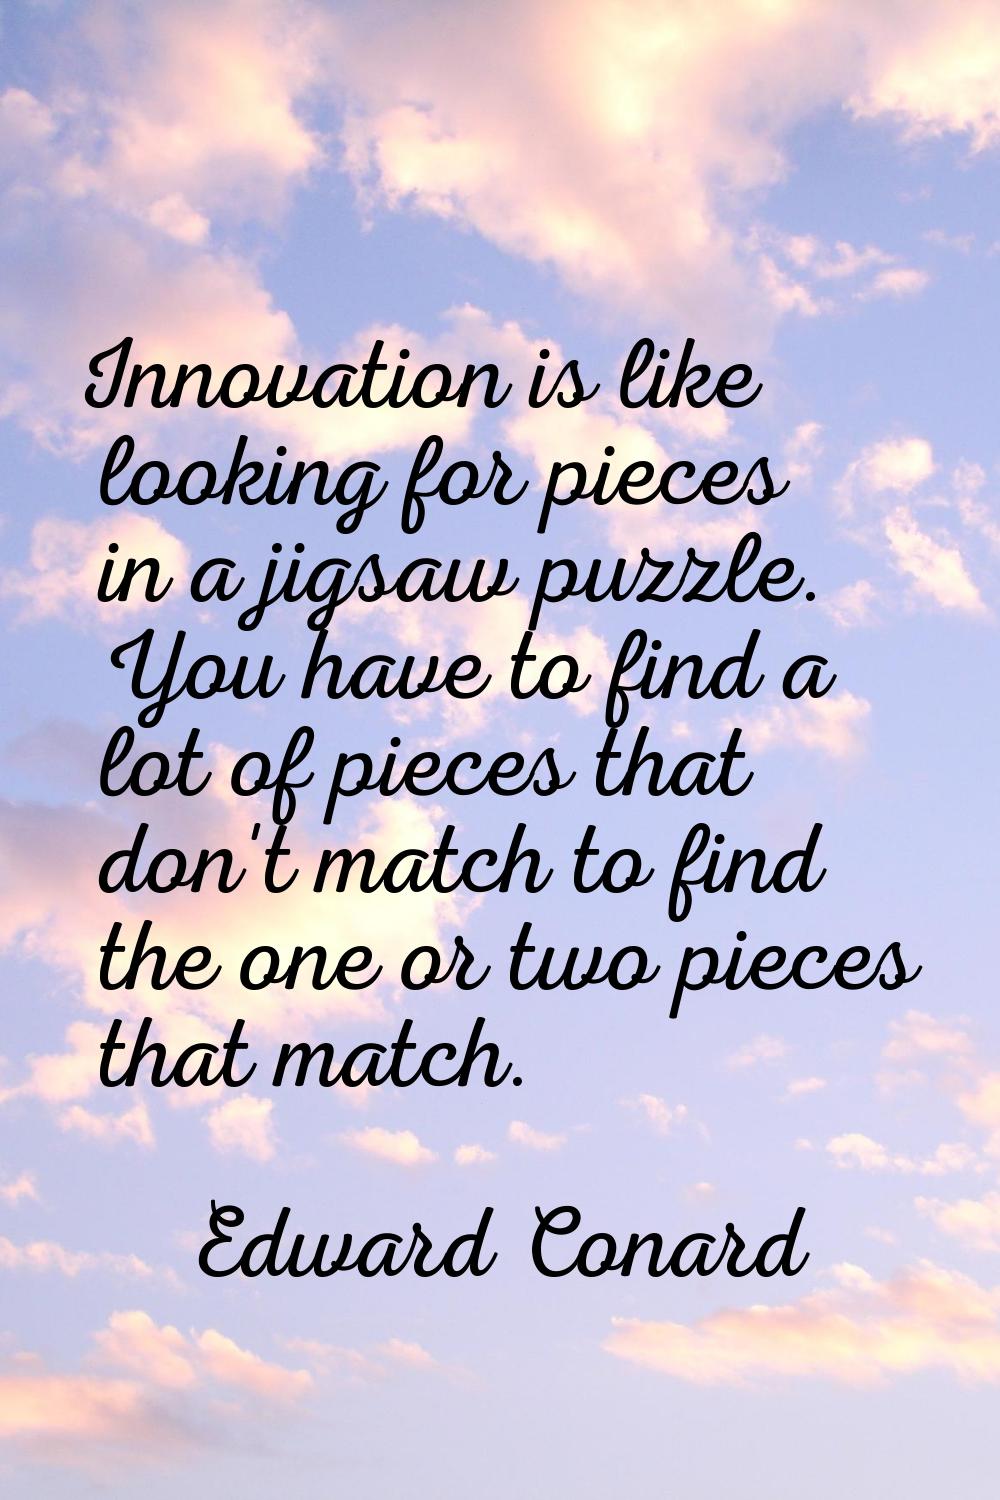 Innovation is like looking for pieces in a jigsaw puzzle. You have to find a lot of pieces that don